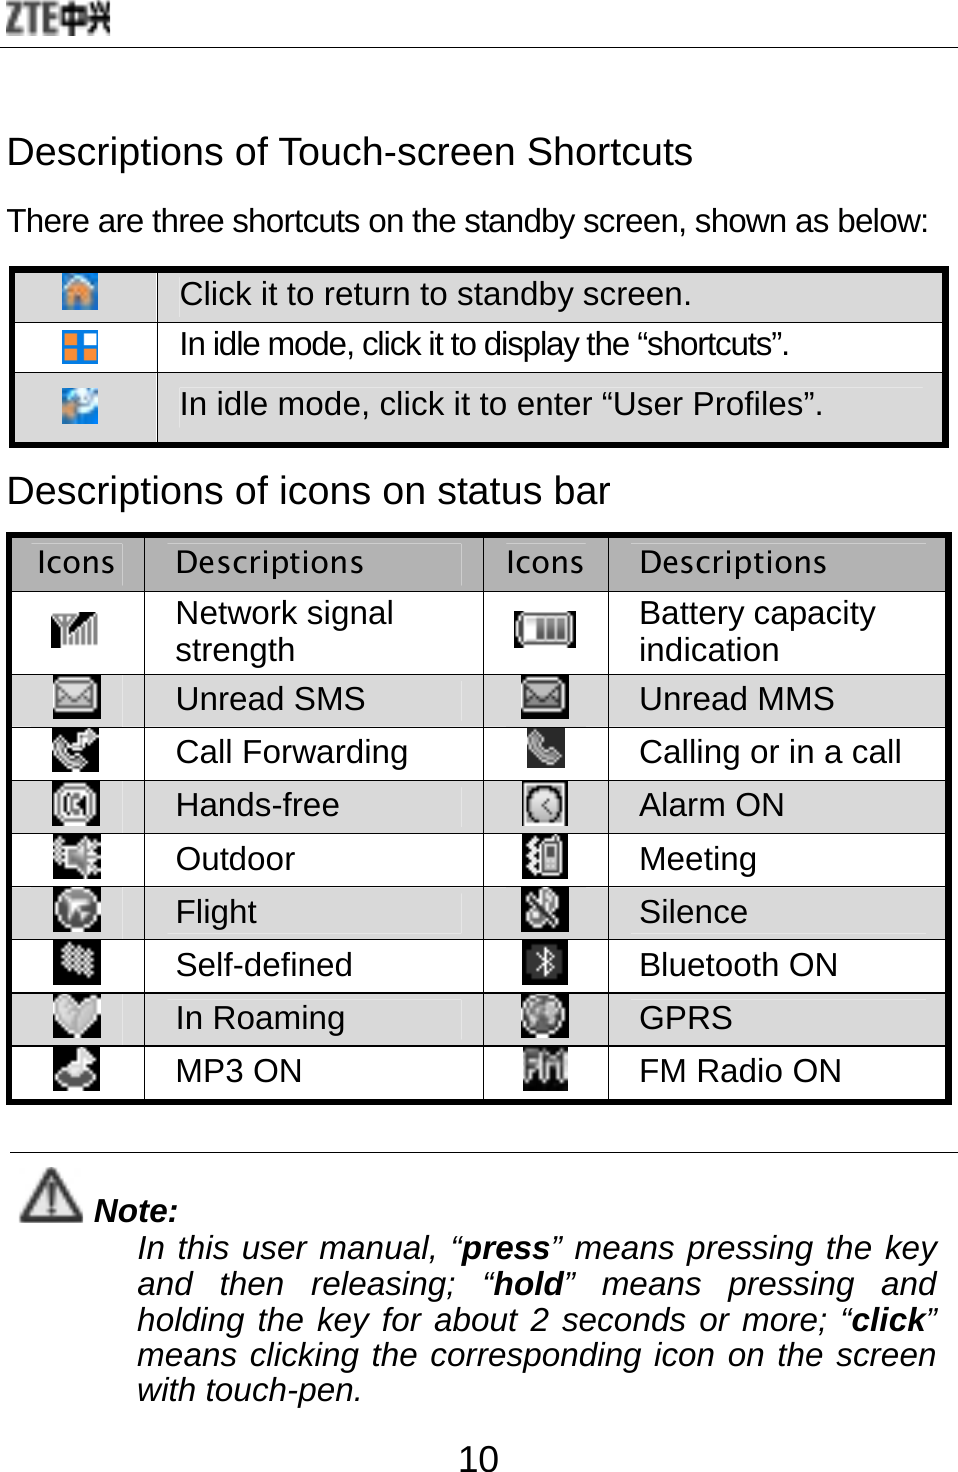  10 Descriptions of Touch-screen Shortcuts There are three shortcuts on the standby screen, shown as below:  Click it to return to standby screen.  In idle mode, click it to display the “shortcuts”.    In idle mode, click it to enter “User Profiles”.   Descriptions of icons on status bar   Icons Descriptions Icons Descriptions  Network signal strength  Battery capacity indication  Unread SMS   Unread MMS  Call Forwarding     Calling or in a call  Hands-free   Alarm ON  Outdoor   Meeting  Flight   Silence  Self-defined   Bluetooth ON  In Roaming   GPRS   MP3 ON   FM Radio ON  Note: In this user manual, “press” means pressing the key and then releasing; “hold” means pressing and holding the key for about 2 seconds or more; “click” means clicking the corresponding icon on the screen with touch-pen.   